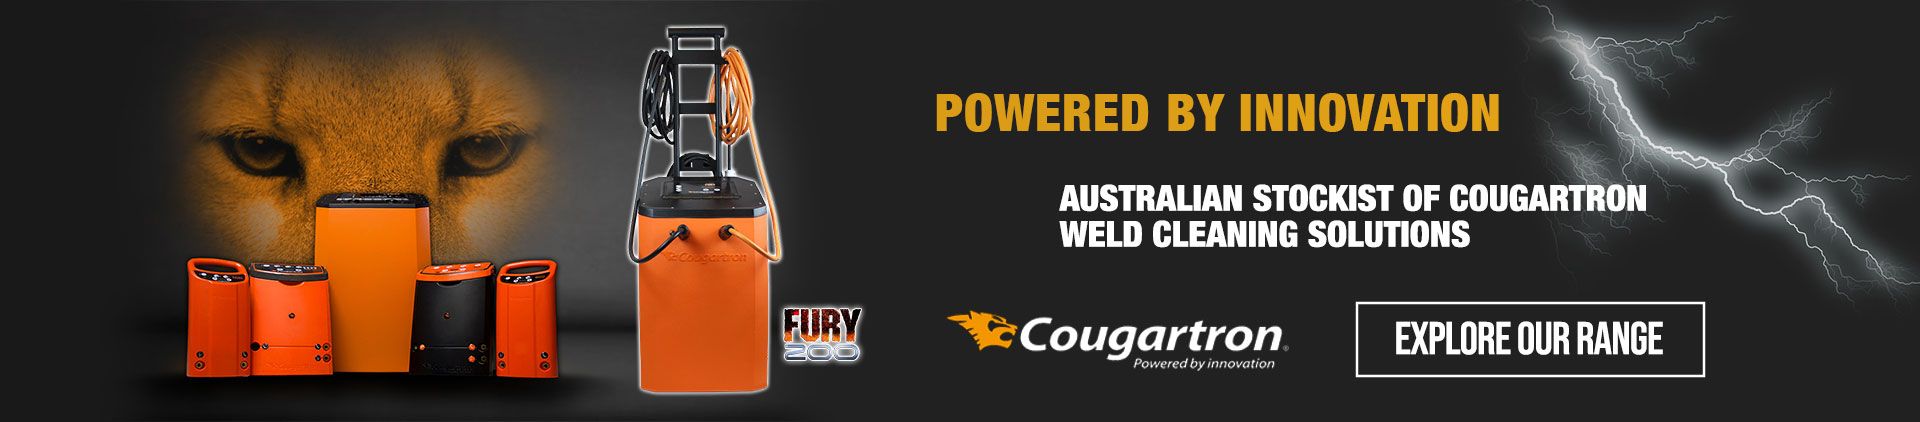 Cougartron Weld Cleaning Solutions